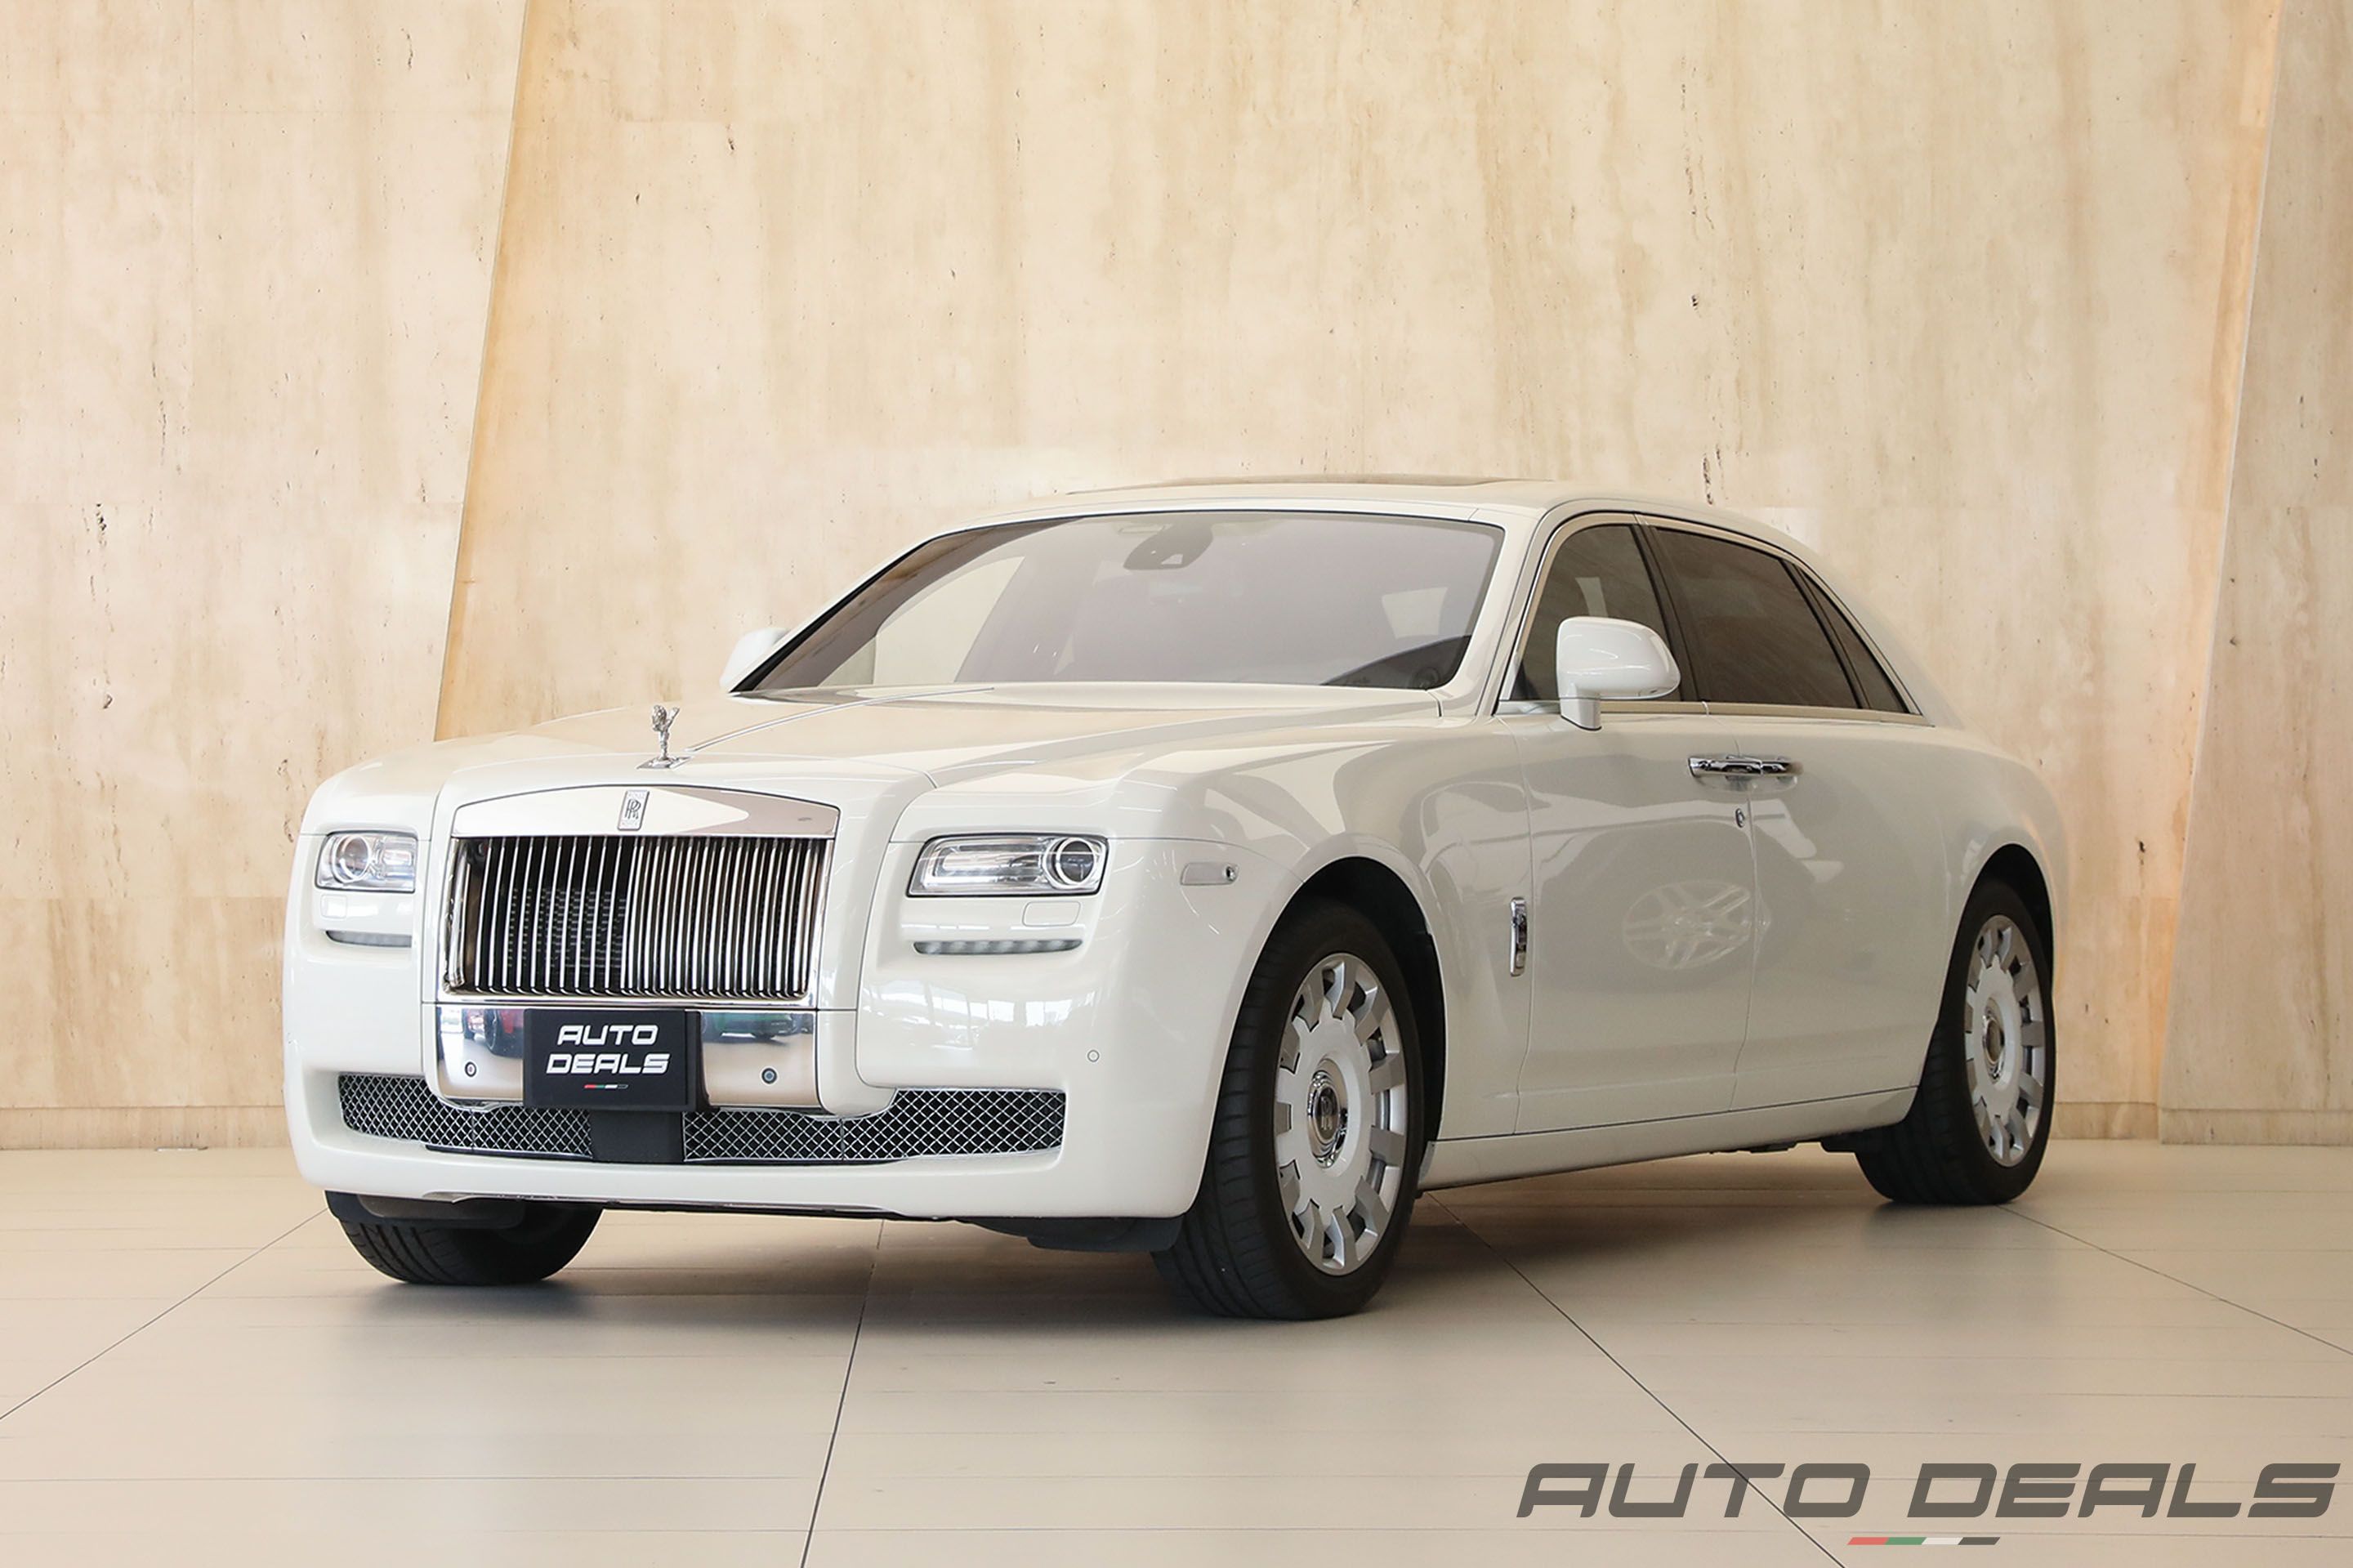 Rolls Royce Ghost | 2012 - Low Mileage - Best in Class - Pristine Condition | 6.6L V12